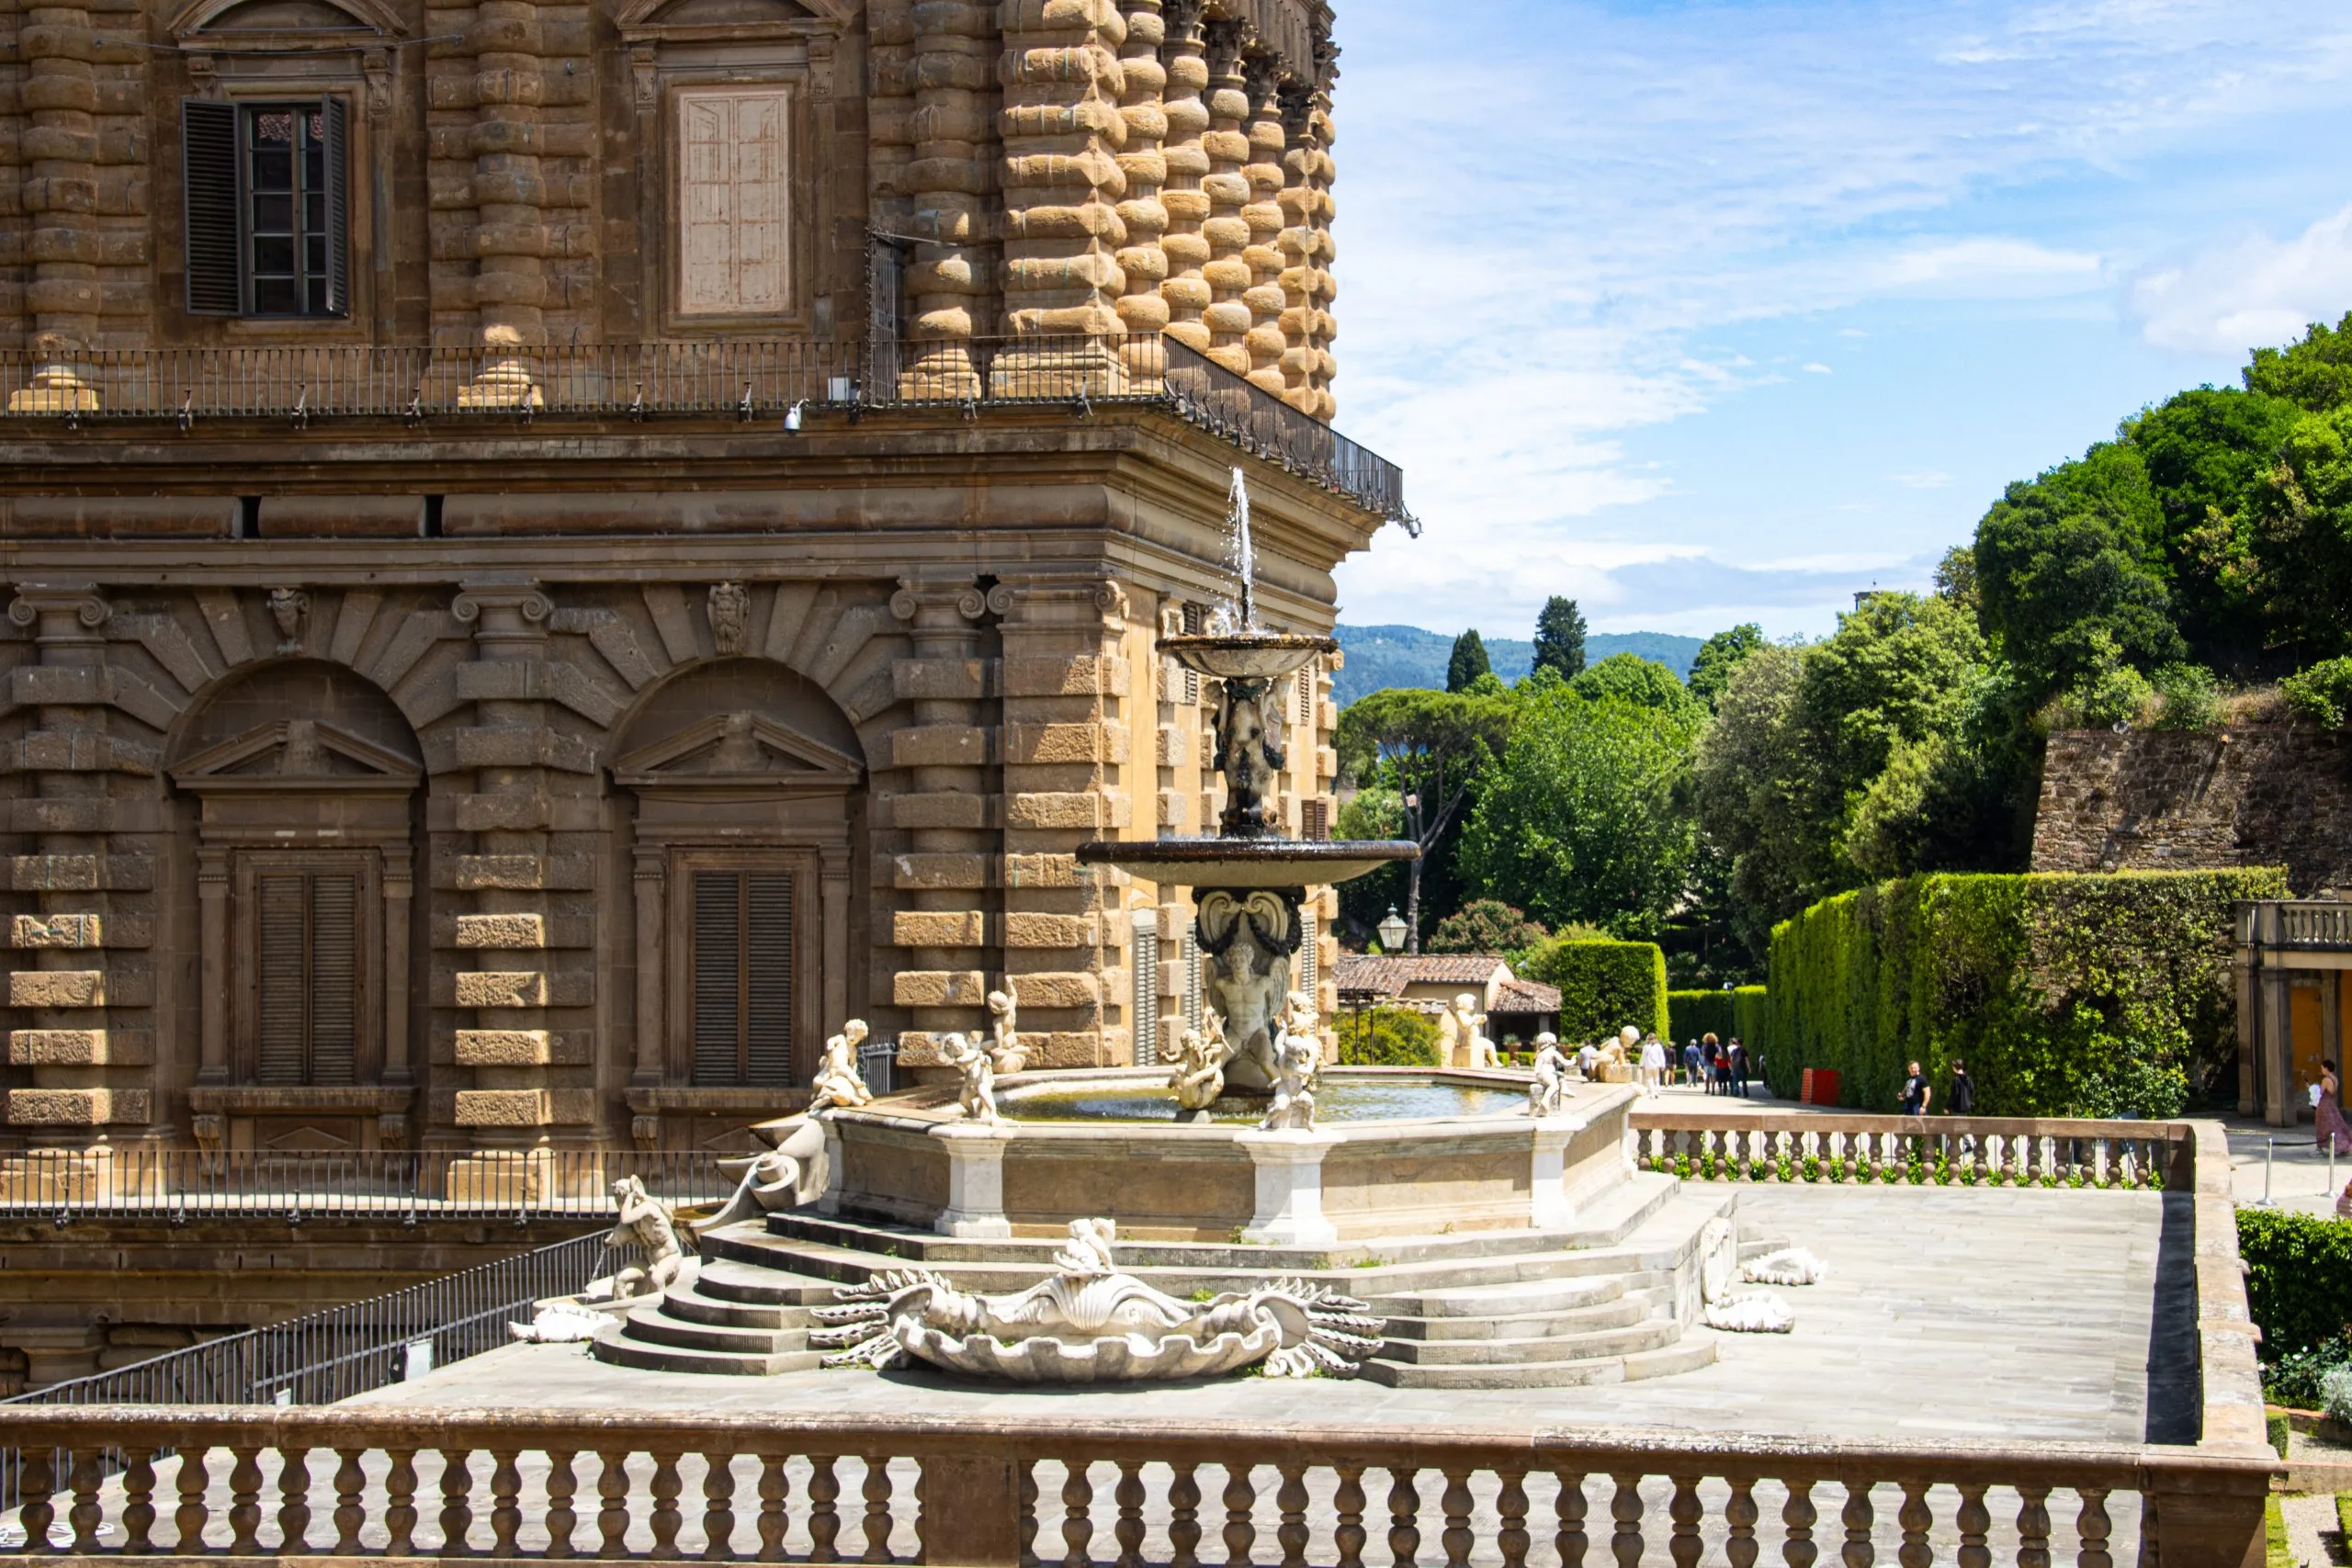 The Artichoke Fountain situated in the Boboli Gardens of Pitti Palace ( Pitti Palazzo) , Florence, Italy